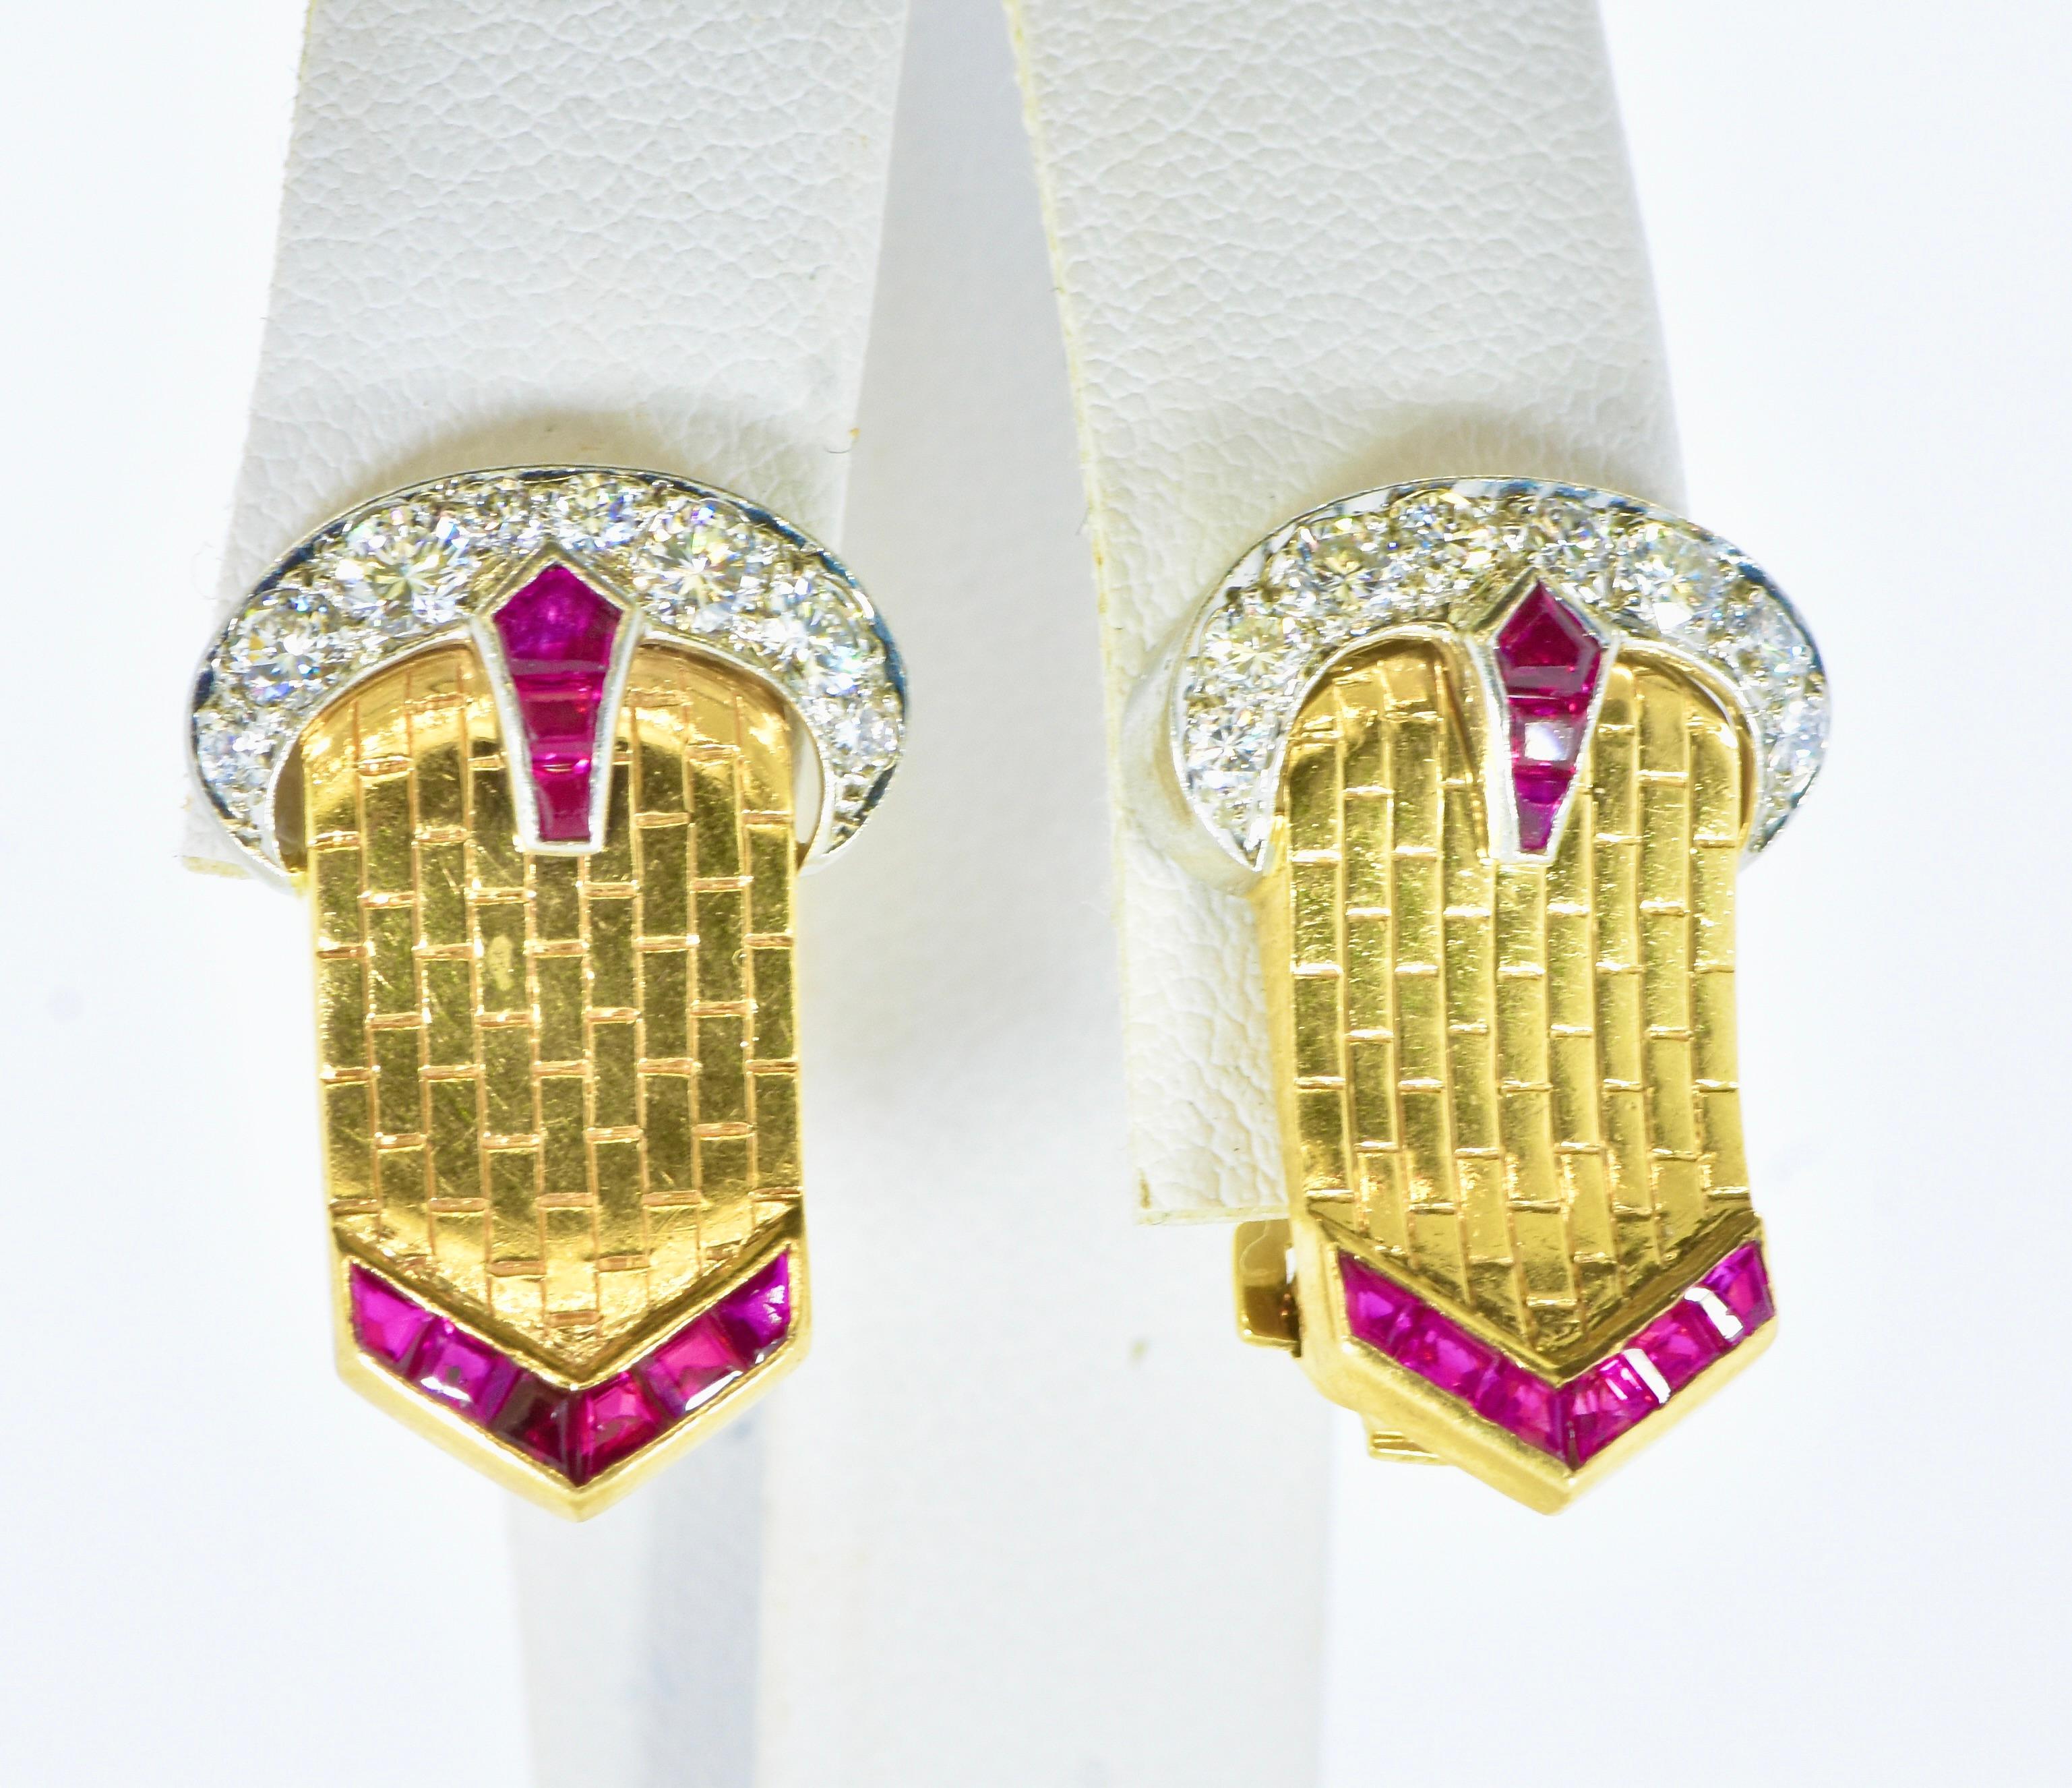 Platinum and Yellow Gold buckle motif earrings, from the late 1940's called - Retro. They possess fine white brilliant cut diamonds, and fancy cut natural vivid red rubies.  The diamonds are estimated to weigh .61 cts., near colorless and very